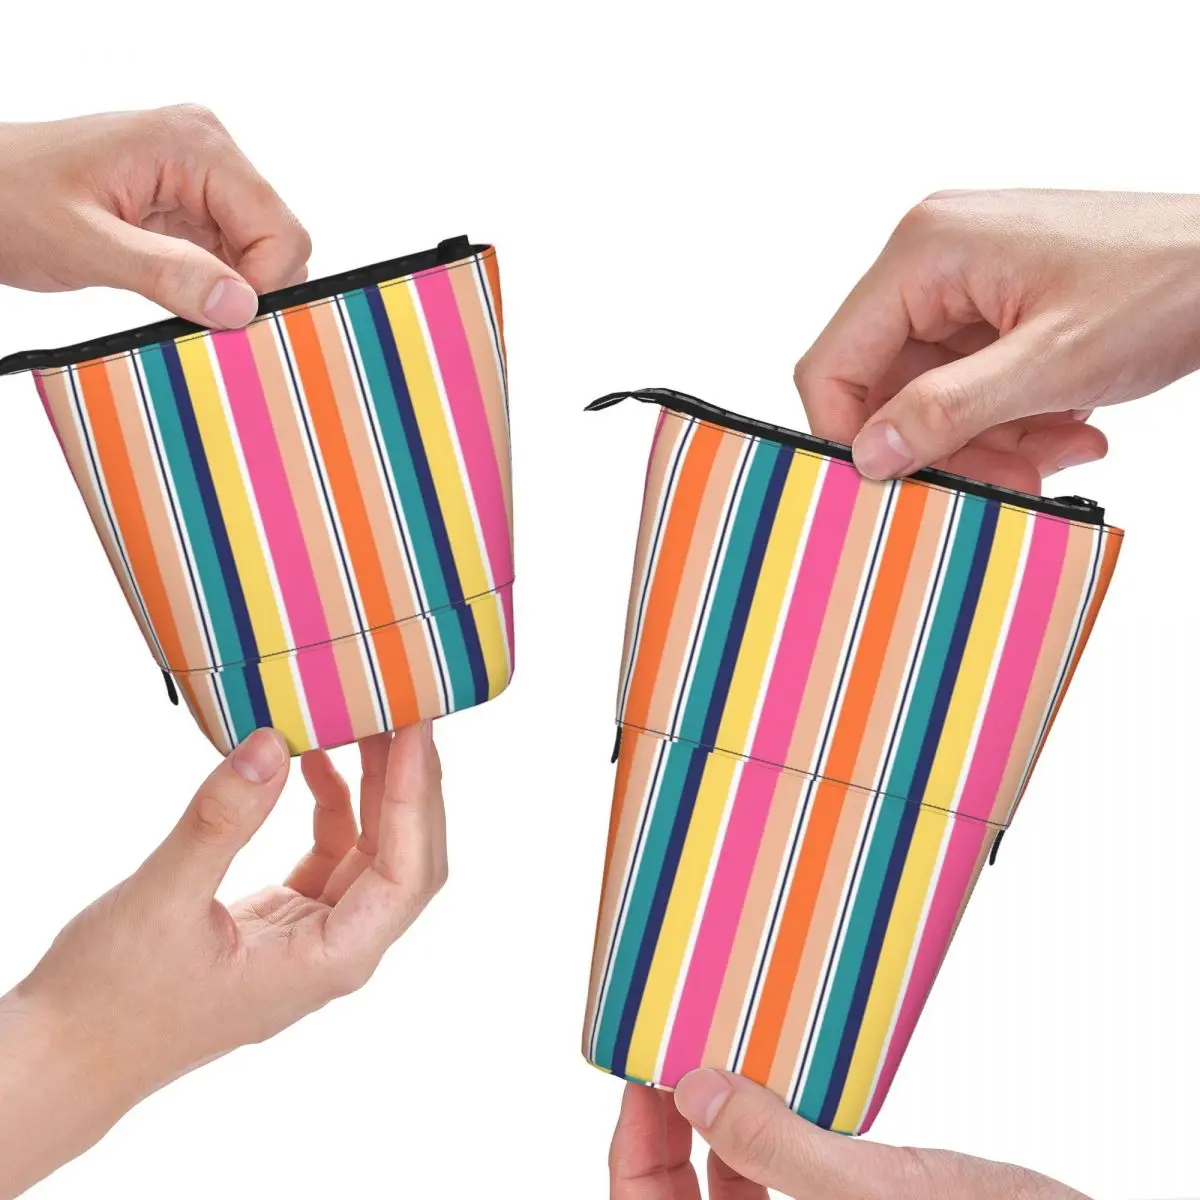 

Bright Striped Fold Pencil Case Colorful Stripes Print Back to School Fashion Standing Pencil Box Teens Pen Bags